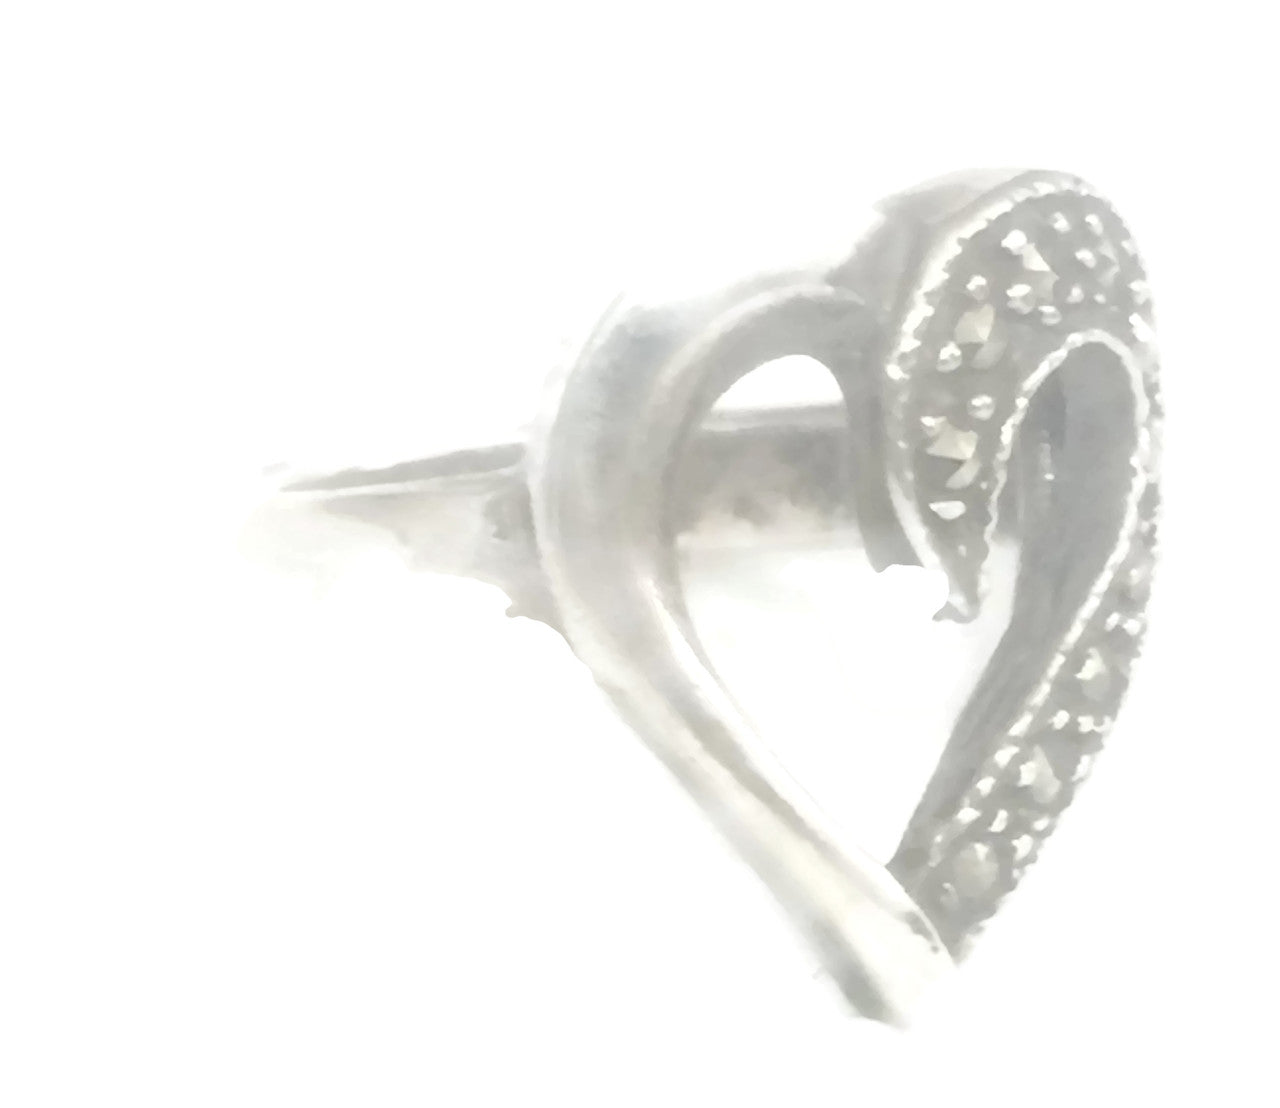 Heart Ring Marcasite Sterling Silver Love Size 6.75